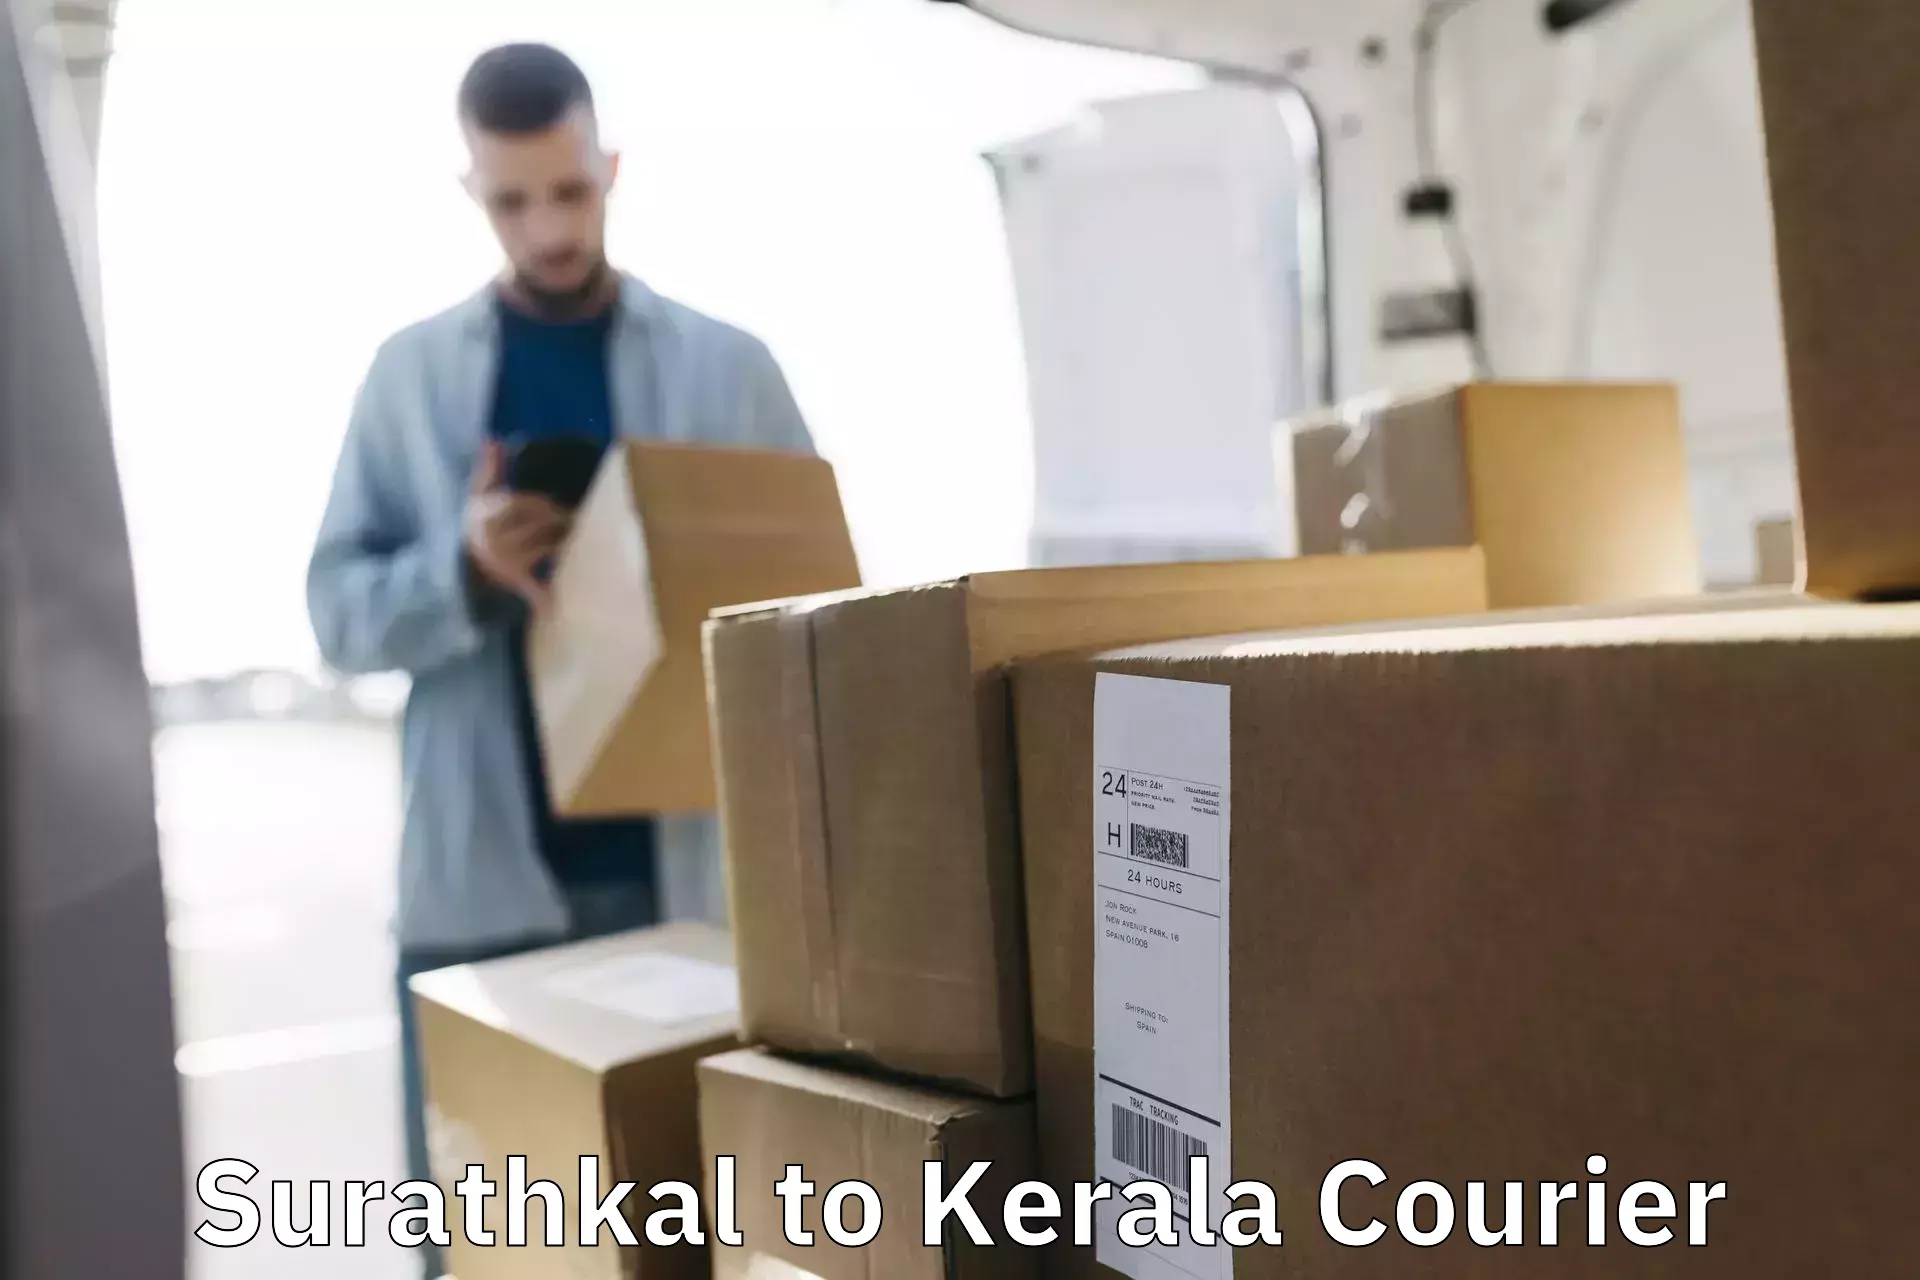 Package tracking Surathkal to Cochin Port Kochi